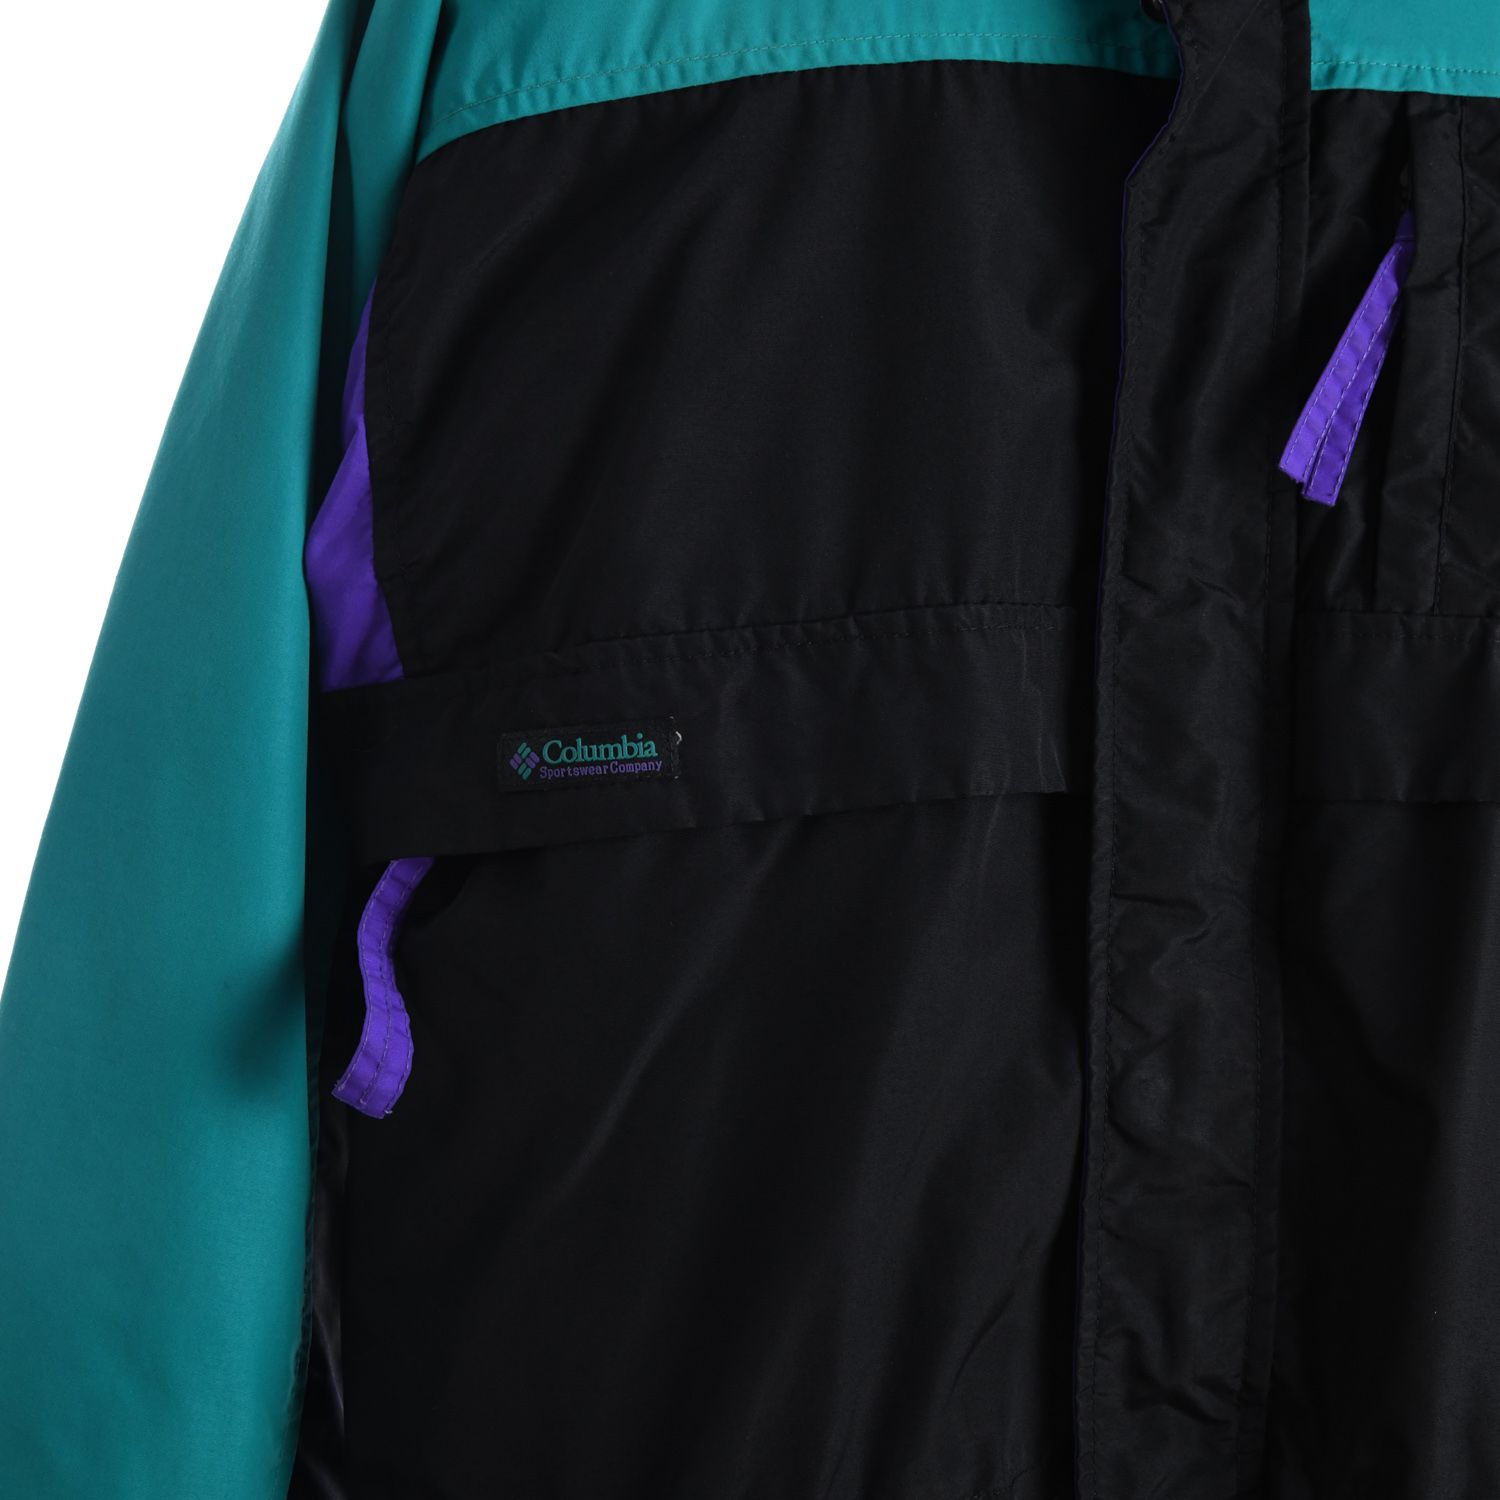 Columbia 1990s 2 in 1 Gizzmo Jacket